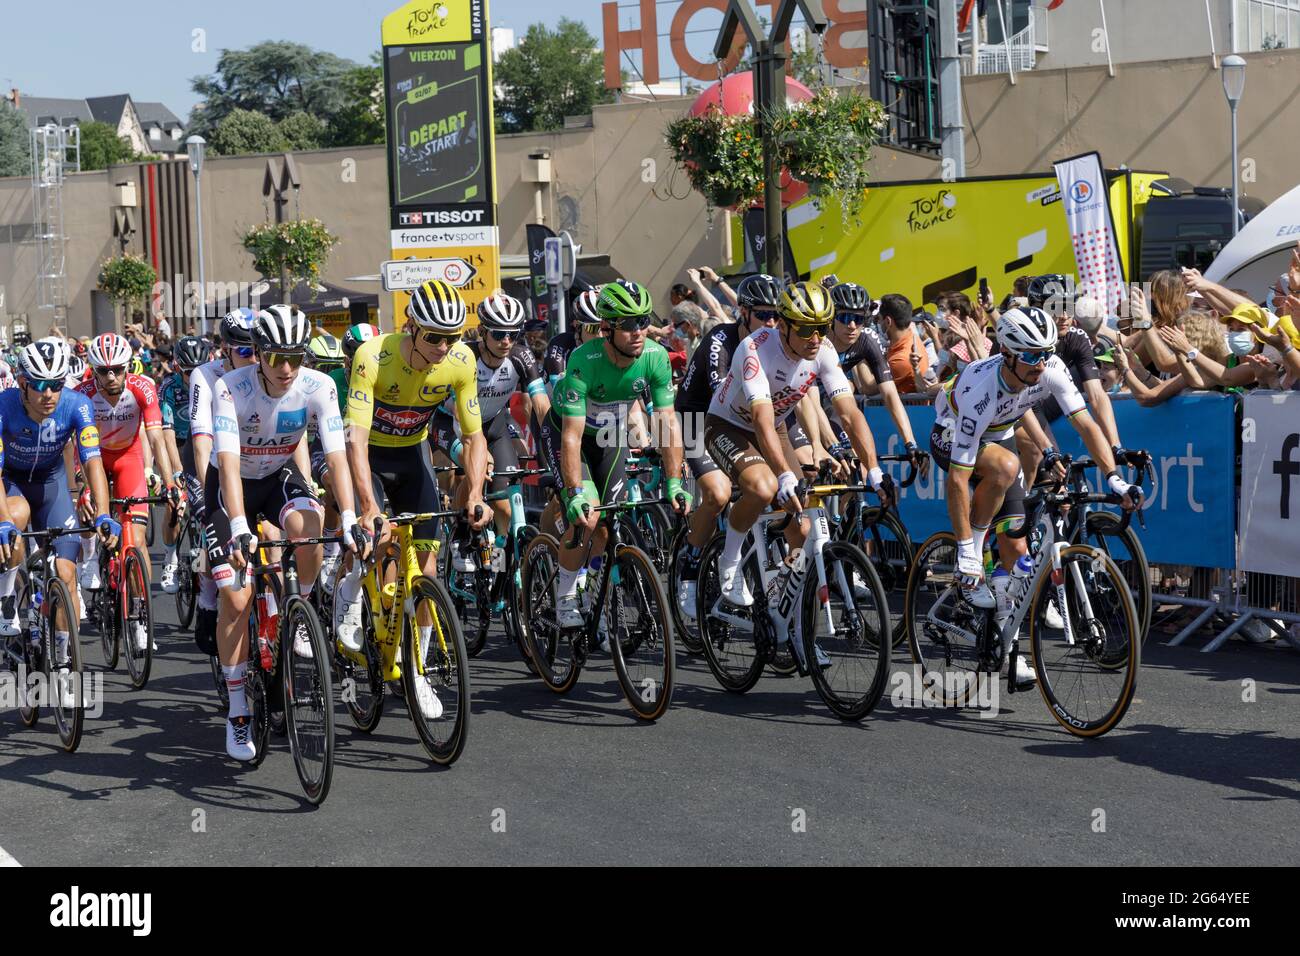 Vierzon, France. 02nd July, 2021. Mark Cavednish in the Maillot Vert at the start of the 7th stage of the Tour de France in Vierzon, France. Credit: Julian Elliott/Alamy Live News Stock Photo